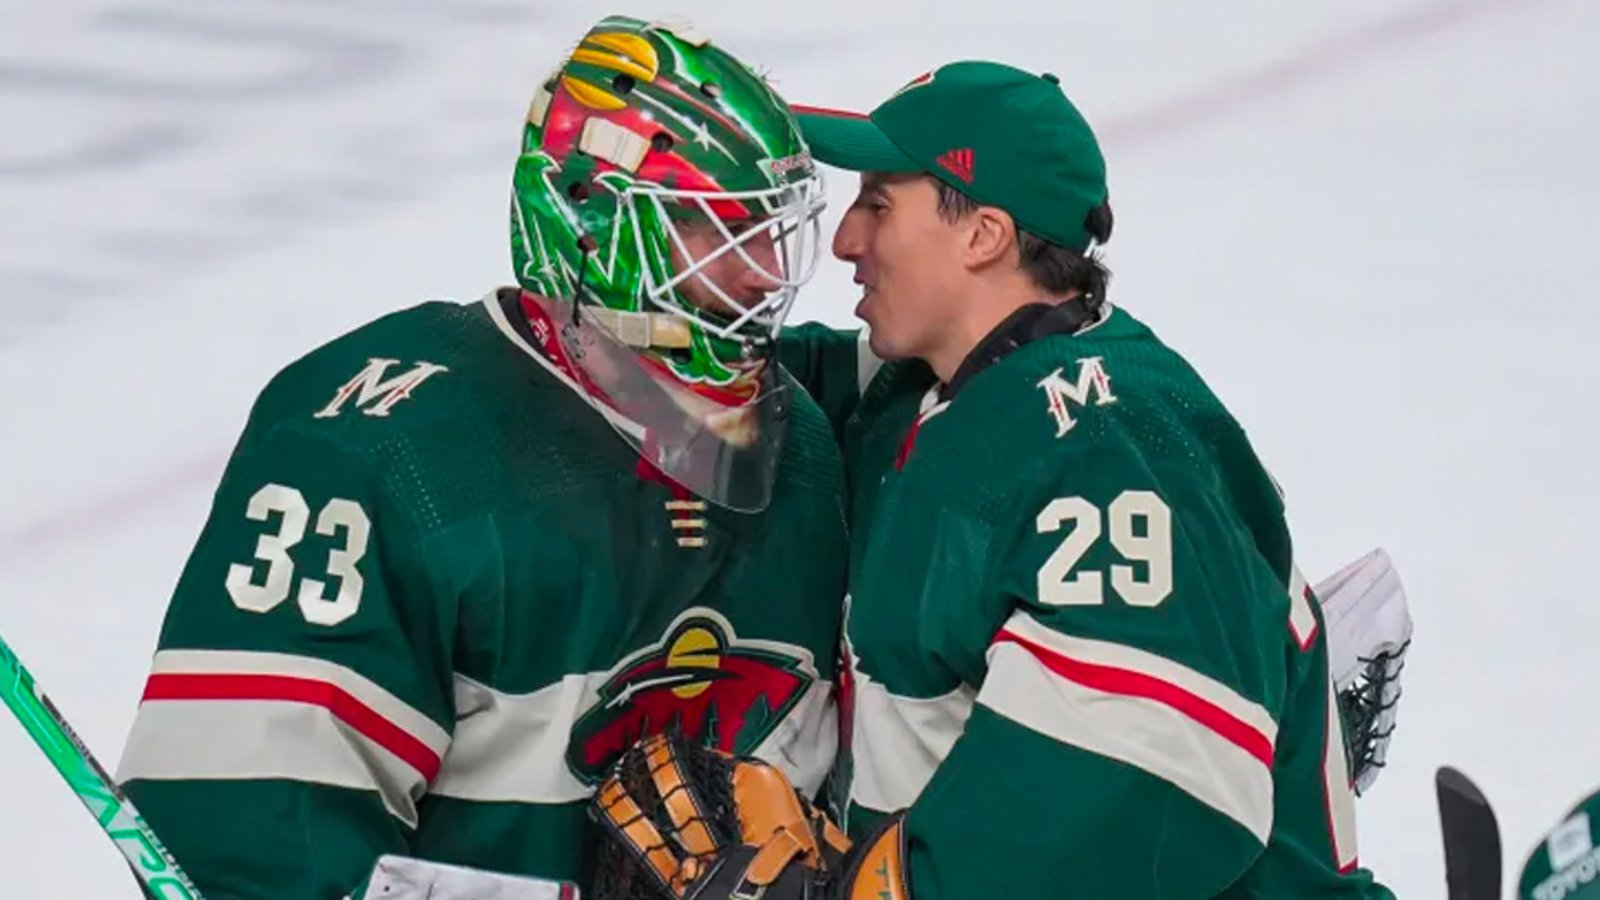 Lineup changes coming for Wild ahead of must win Game 6